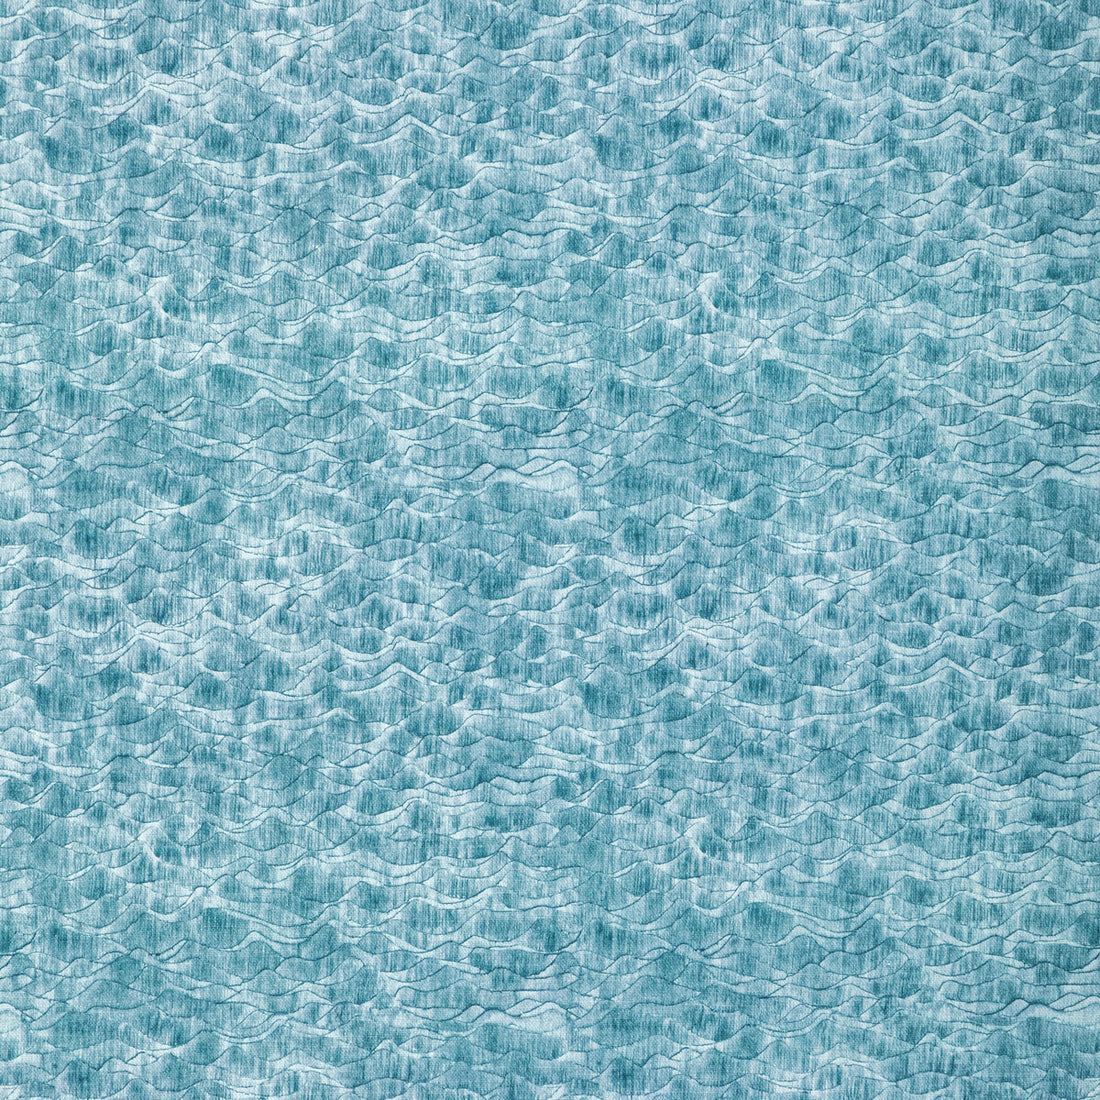 Seafarer fabric in atlantic color - pattern SEAFARER.5.0 - by Kravet Basics in the Jeffrey Alan Marks Seascapes collection